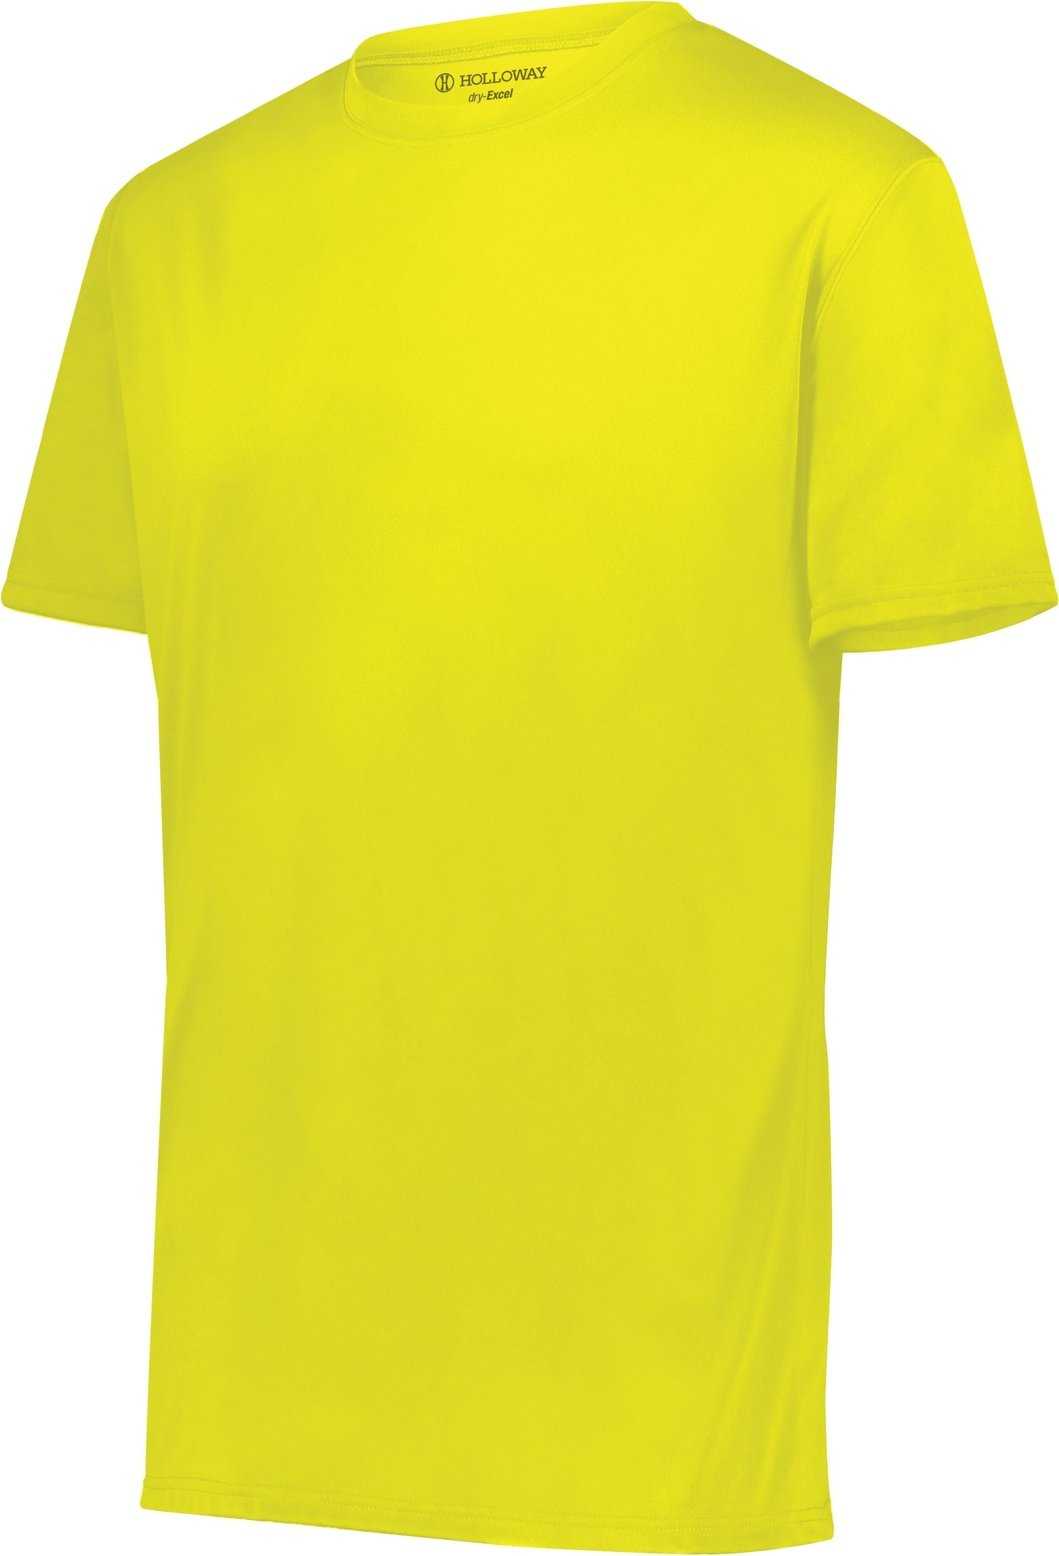 Holloway 222818 Momentum Tee - Safety Yellow - HIT a Double